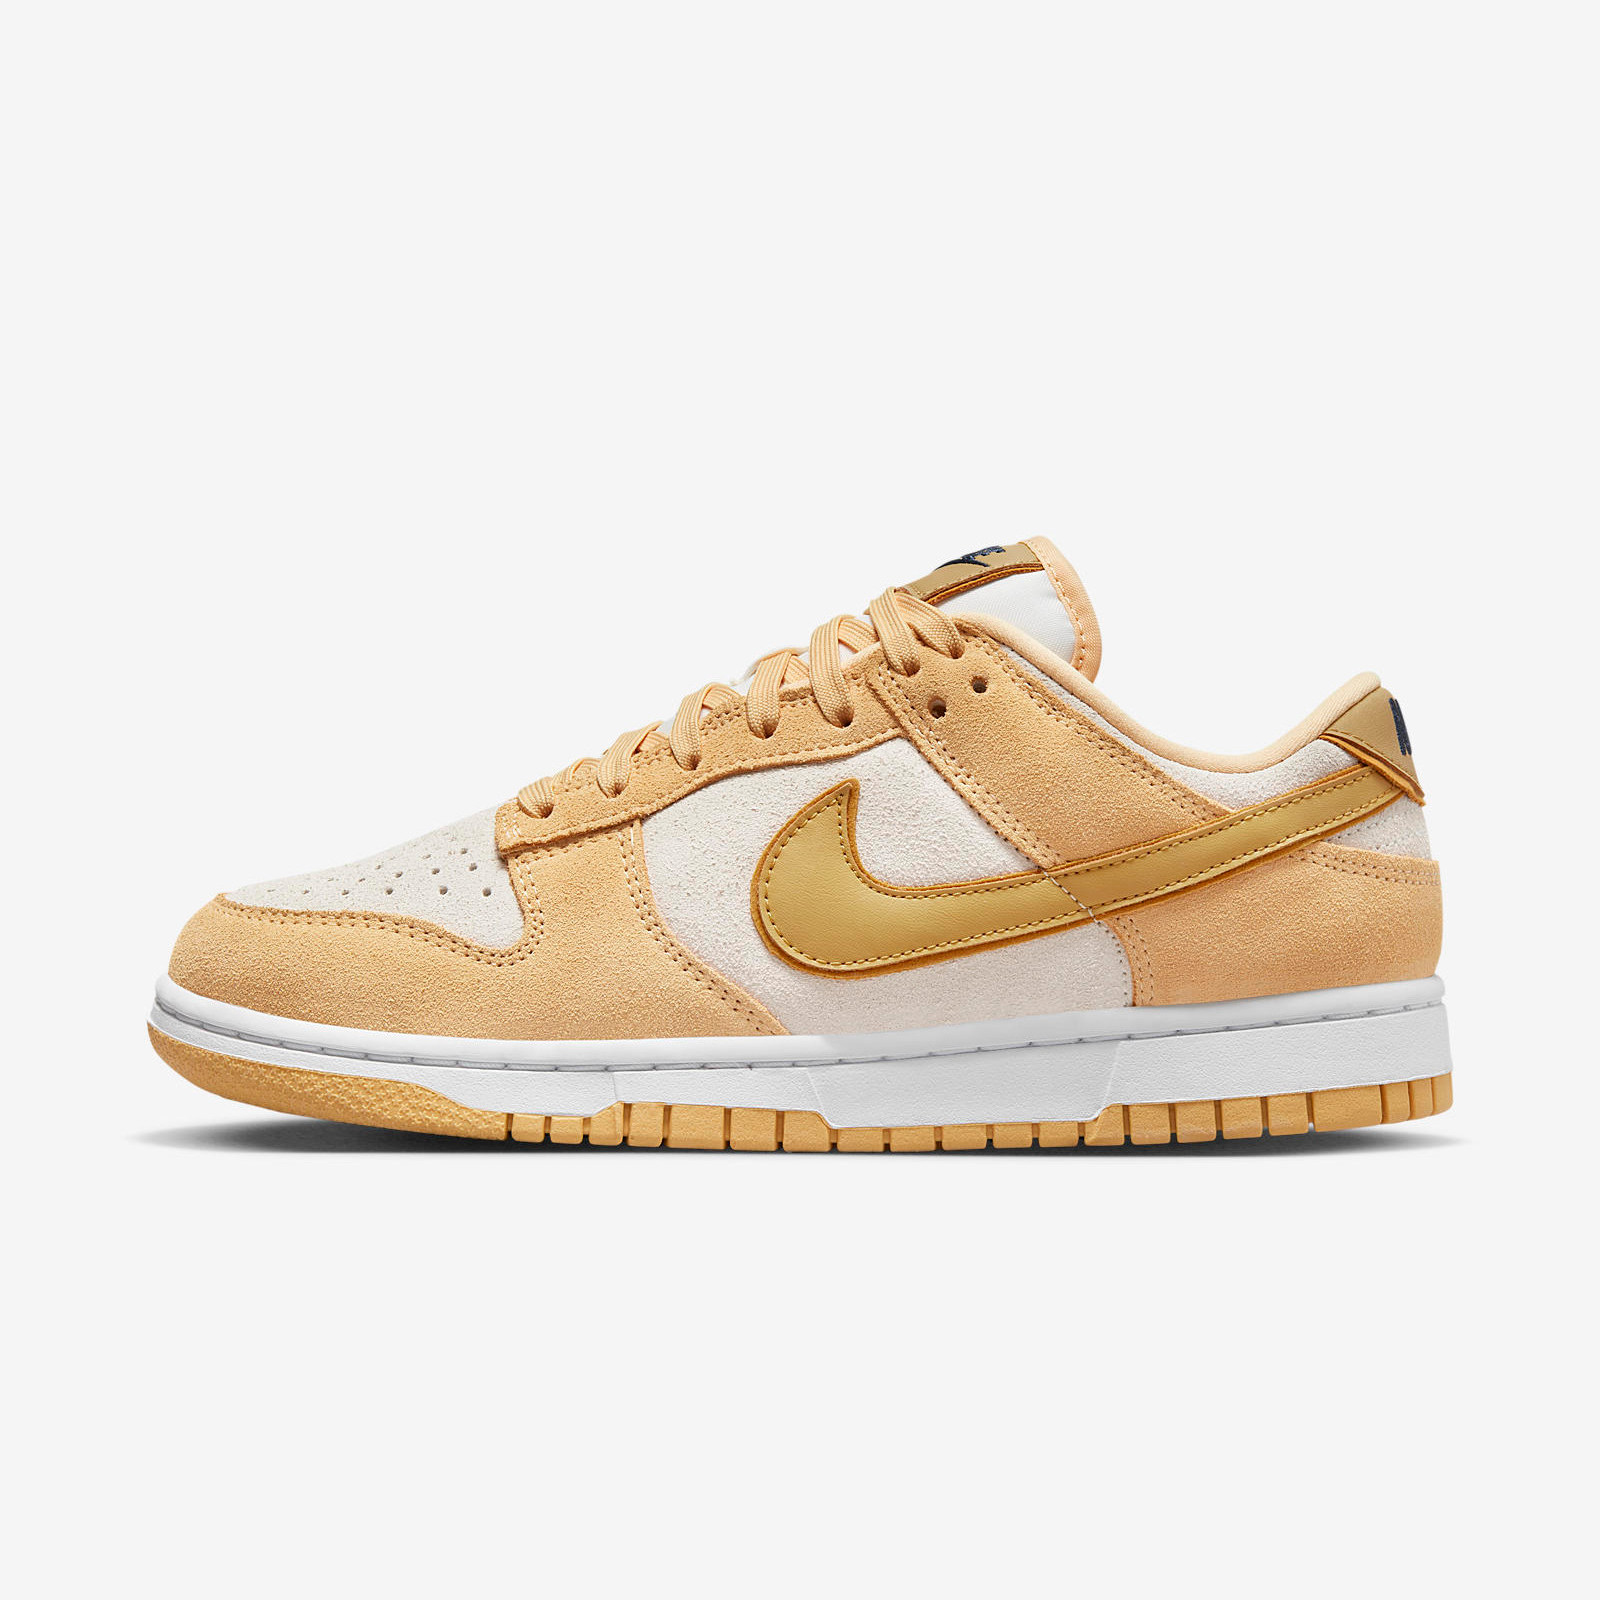 Nike Dunk Low
« Gold Suede »